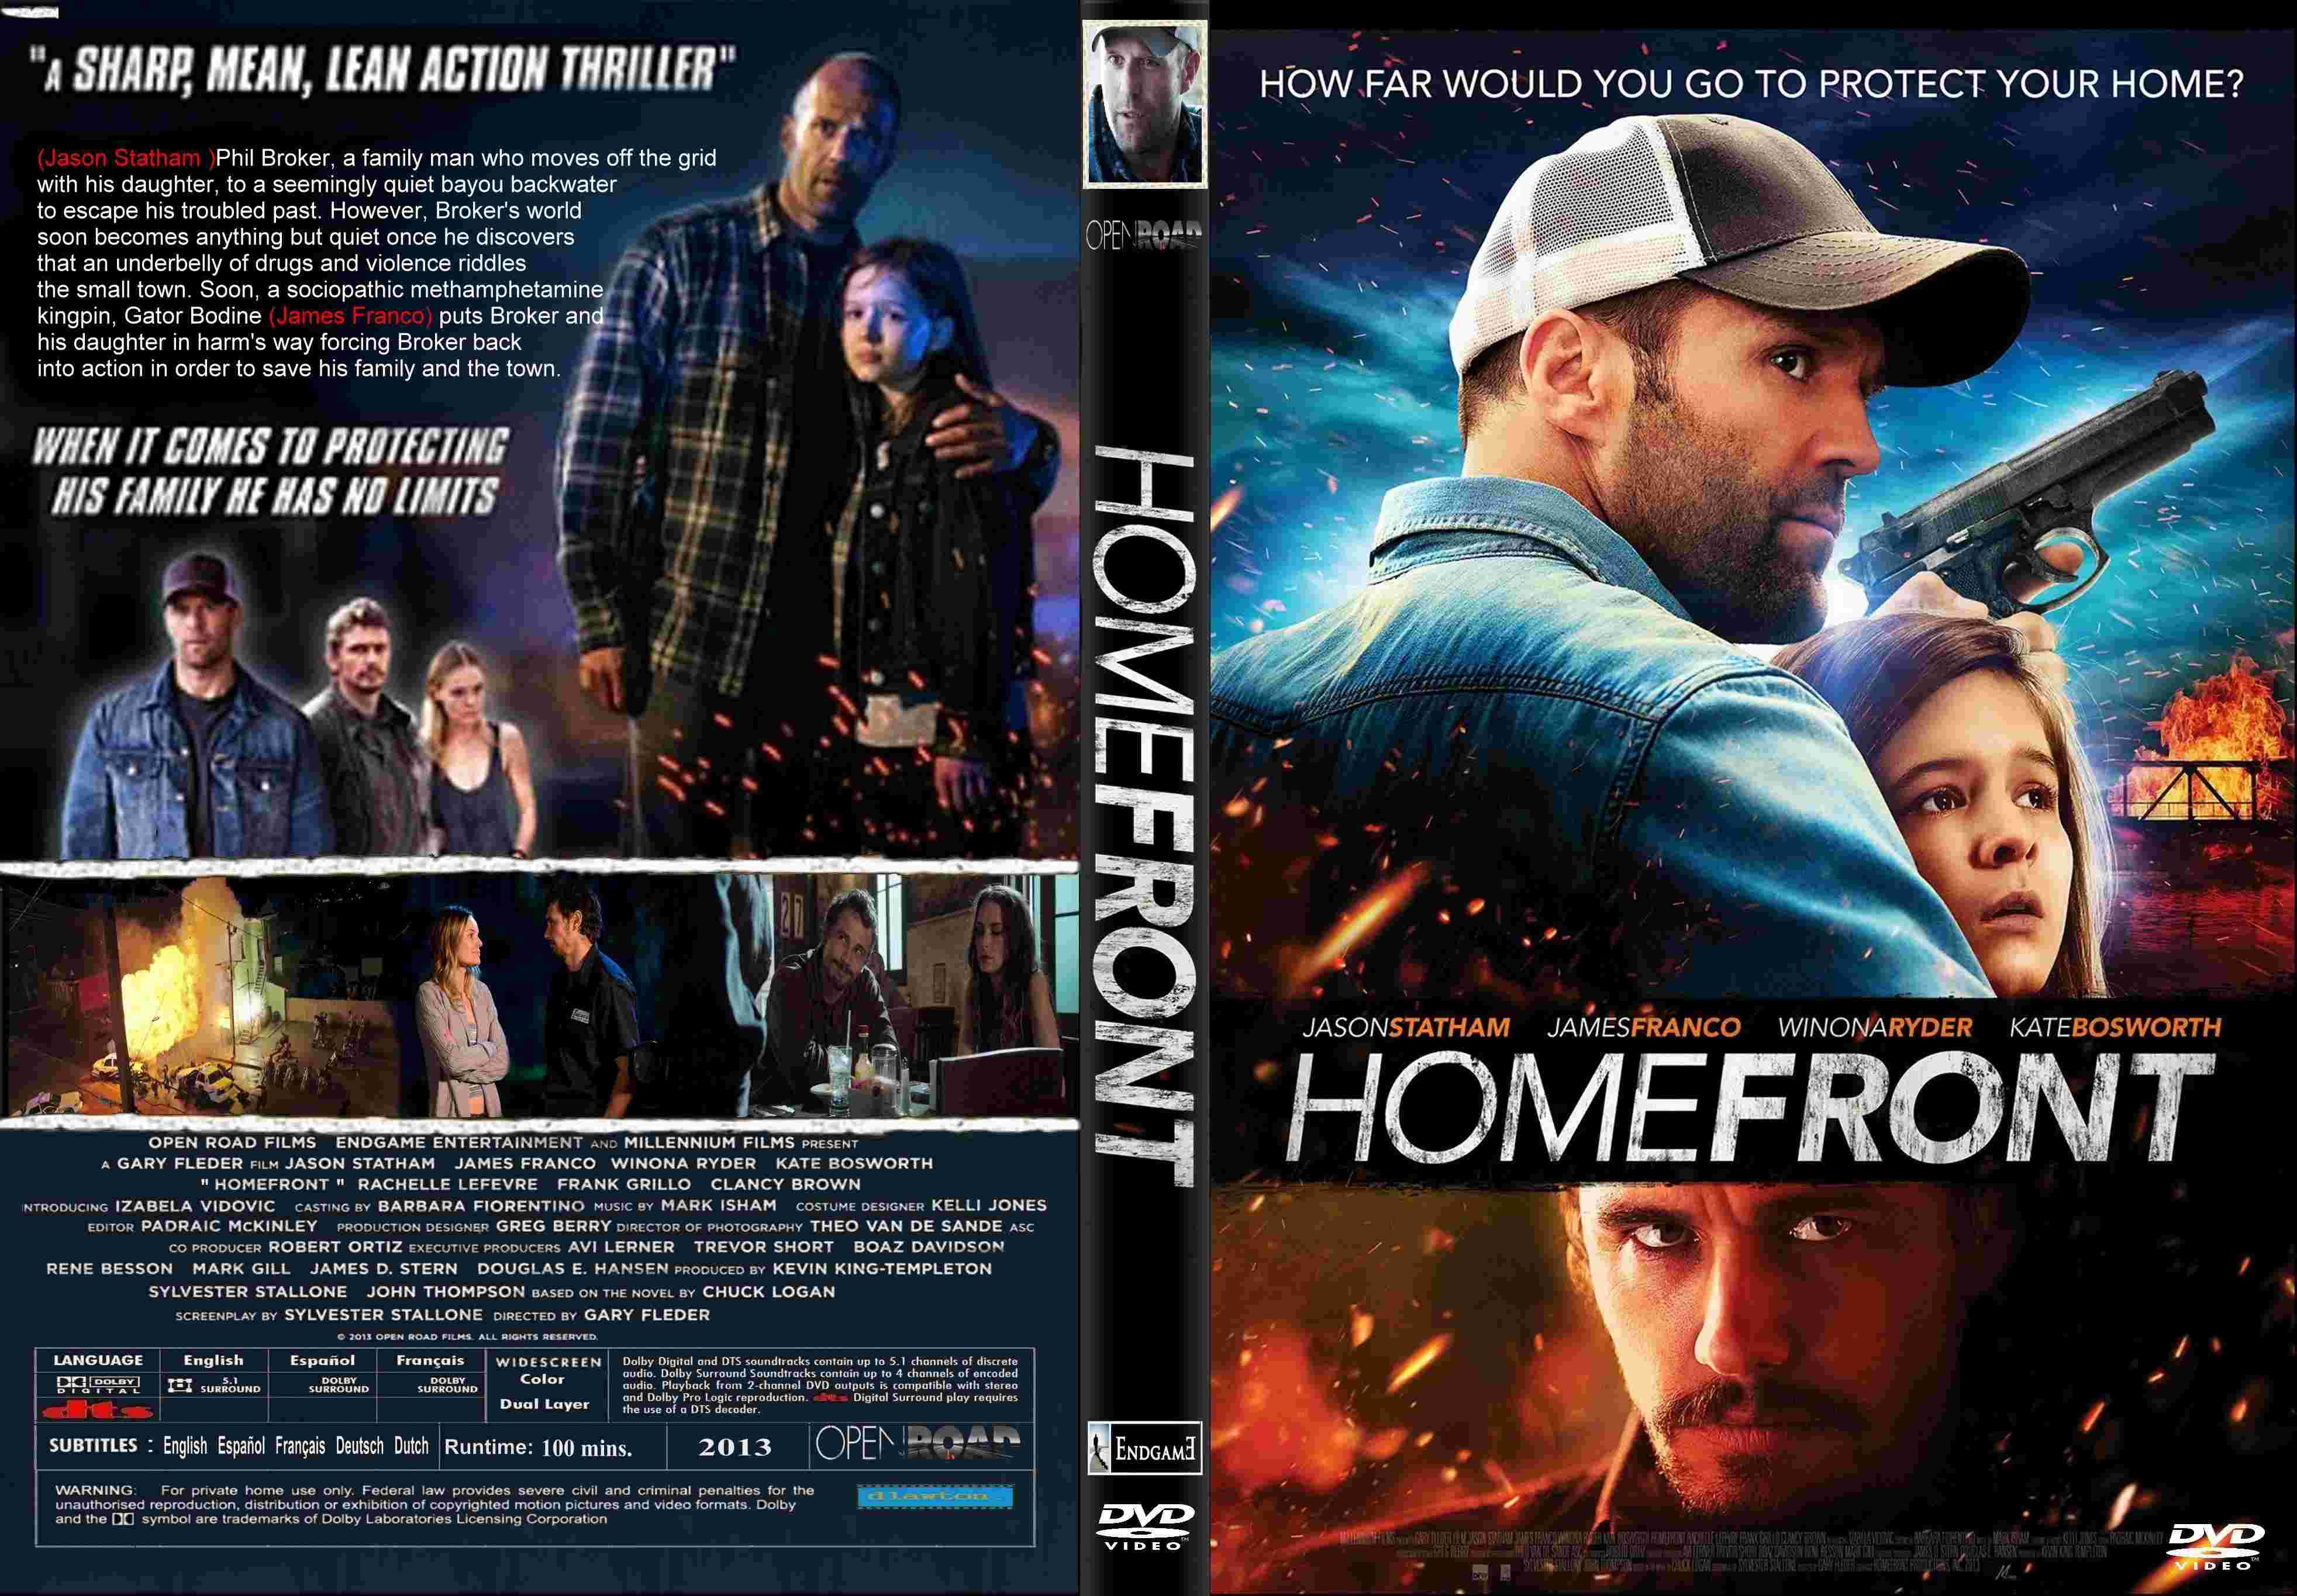 Jaquette DVD Homefront custom Zone 1